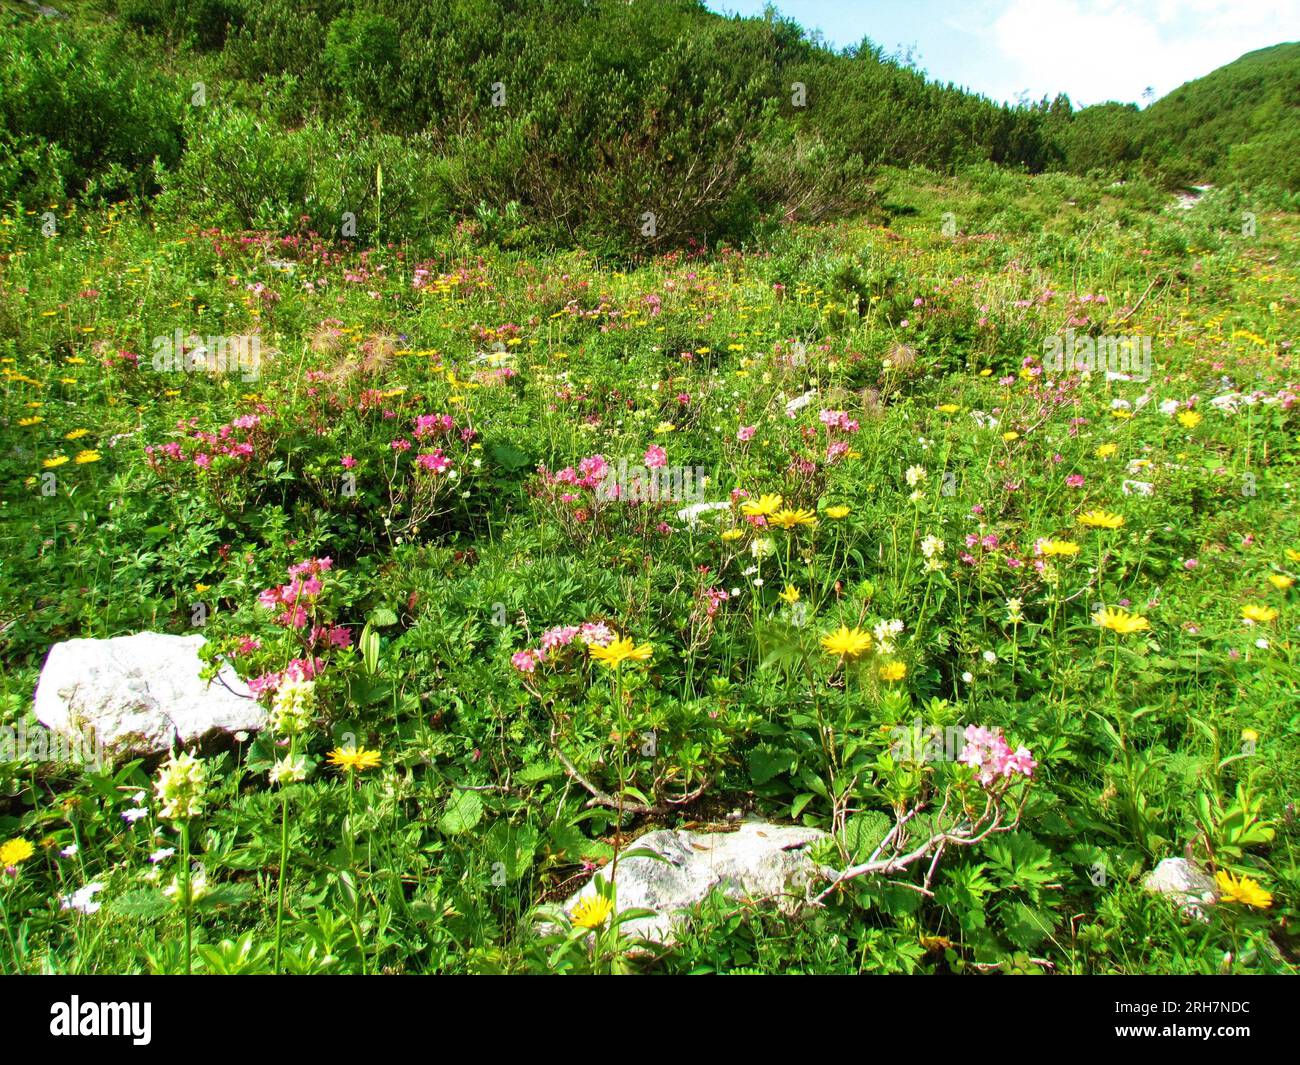 Colorful alpine wild garden with pink hairy alpenrose (Rhododendron hirsutum) and yellow flowers in Julian alps and Triglav national park, Slovenia Stock Photo